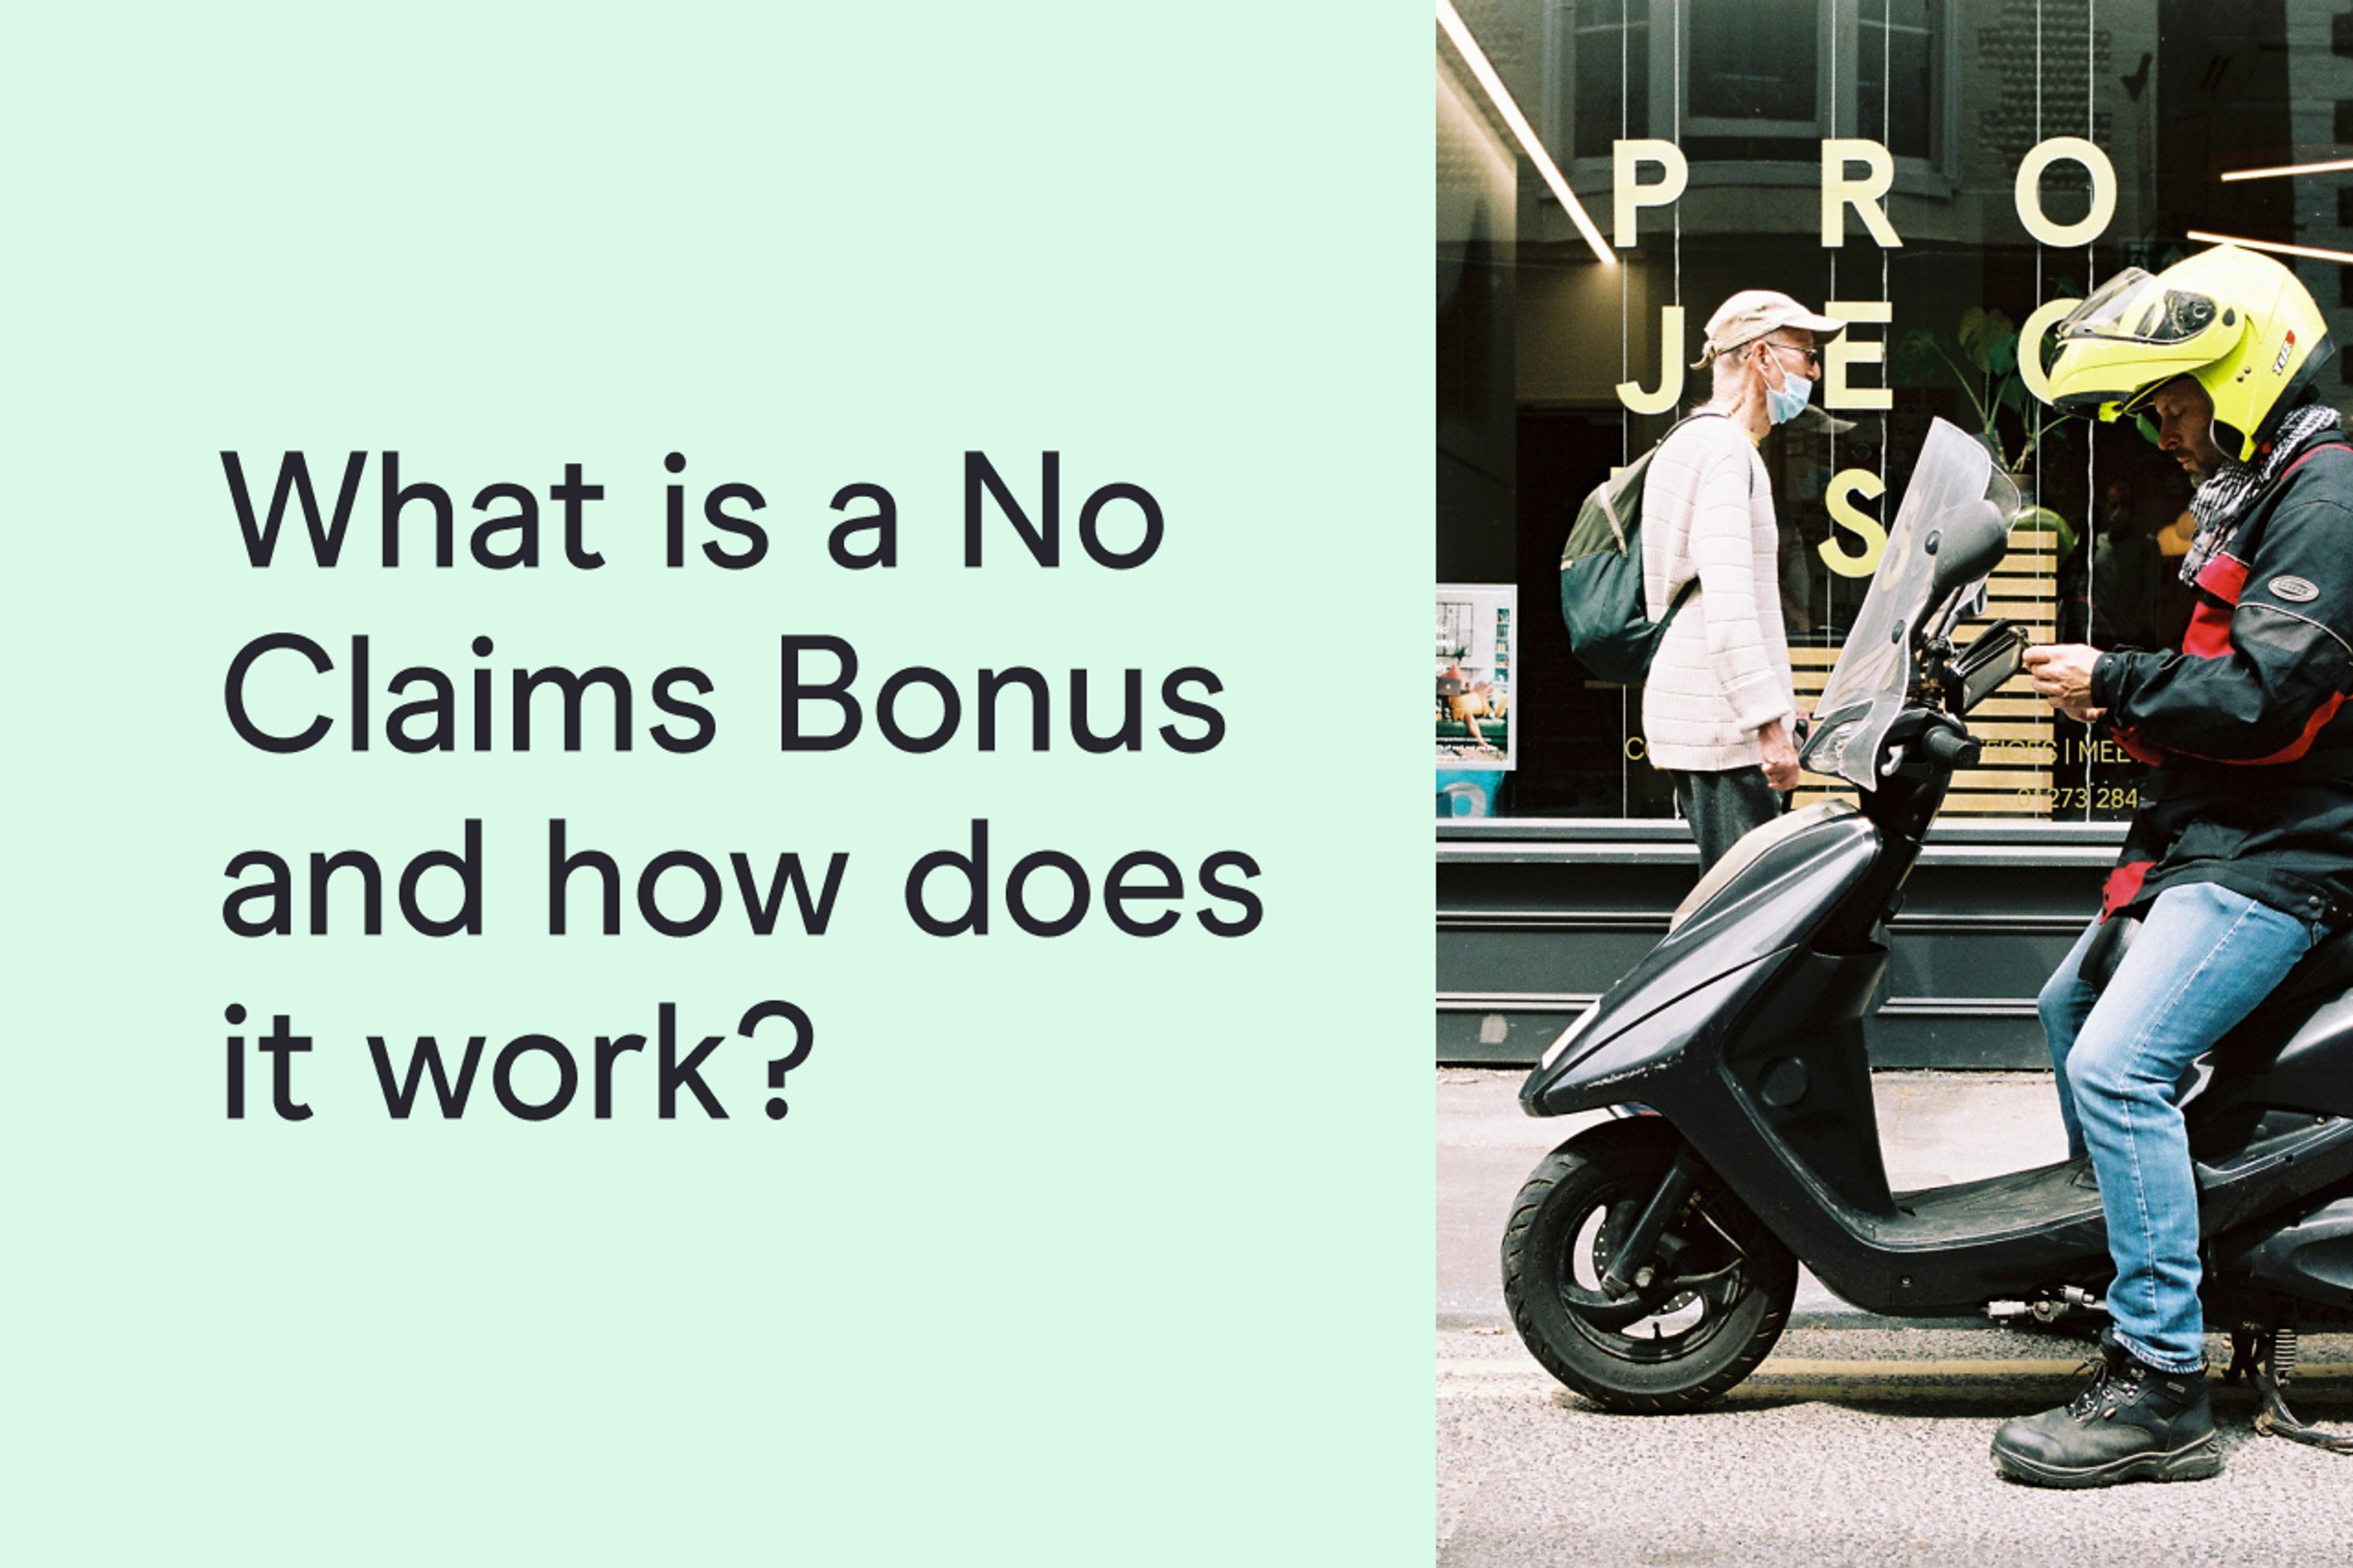 What is a No Claims Bonus and how does it work?